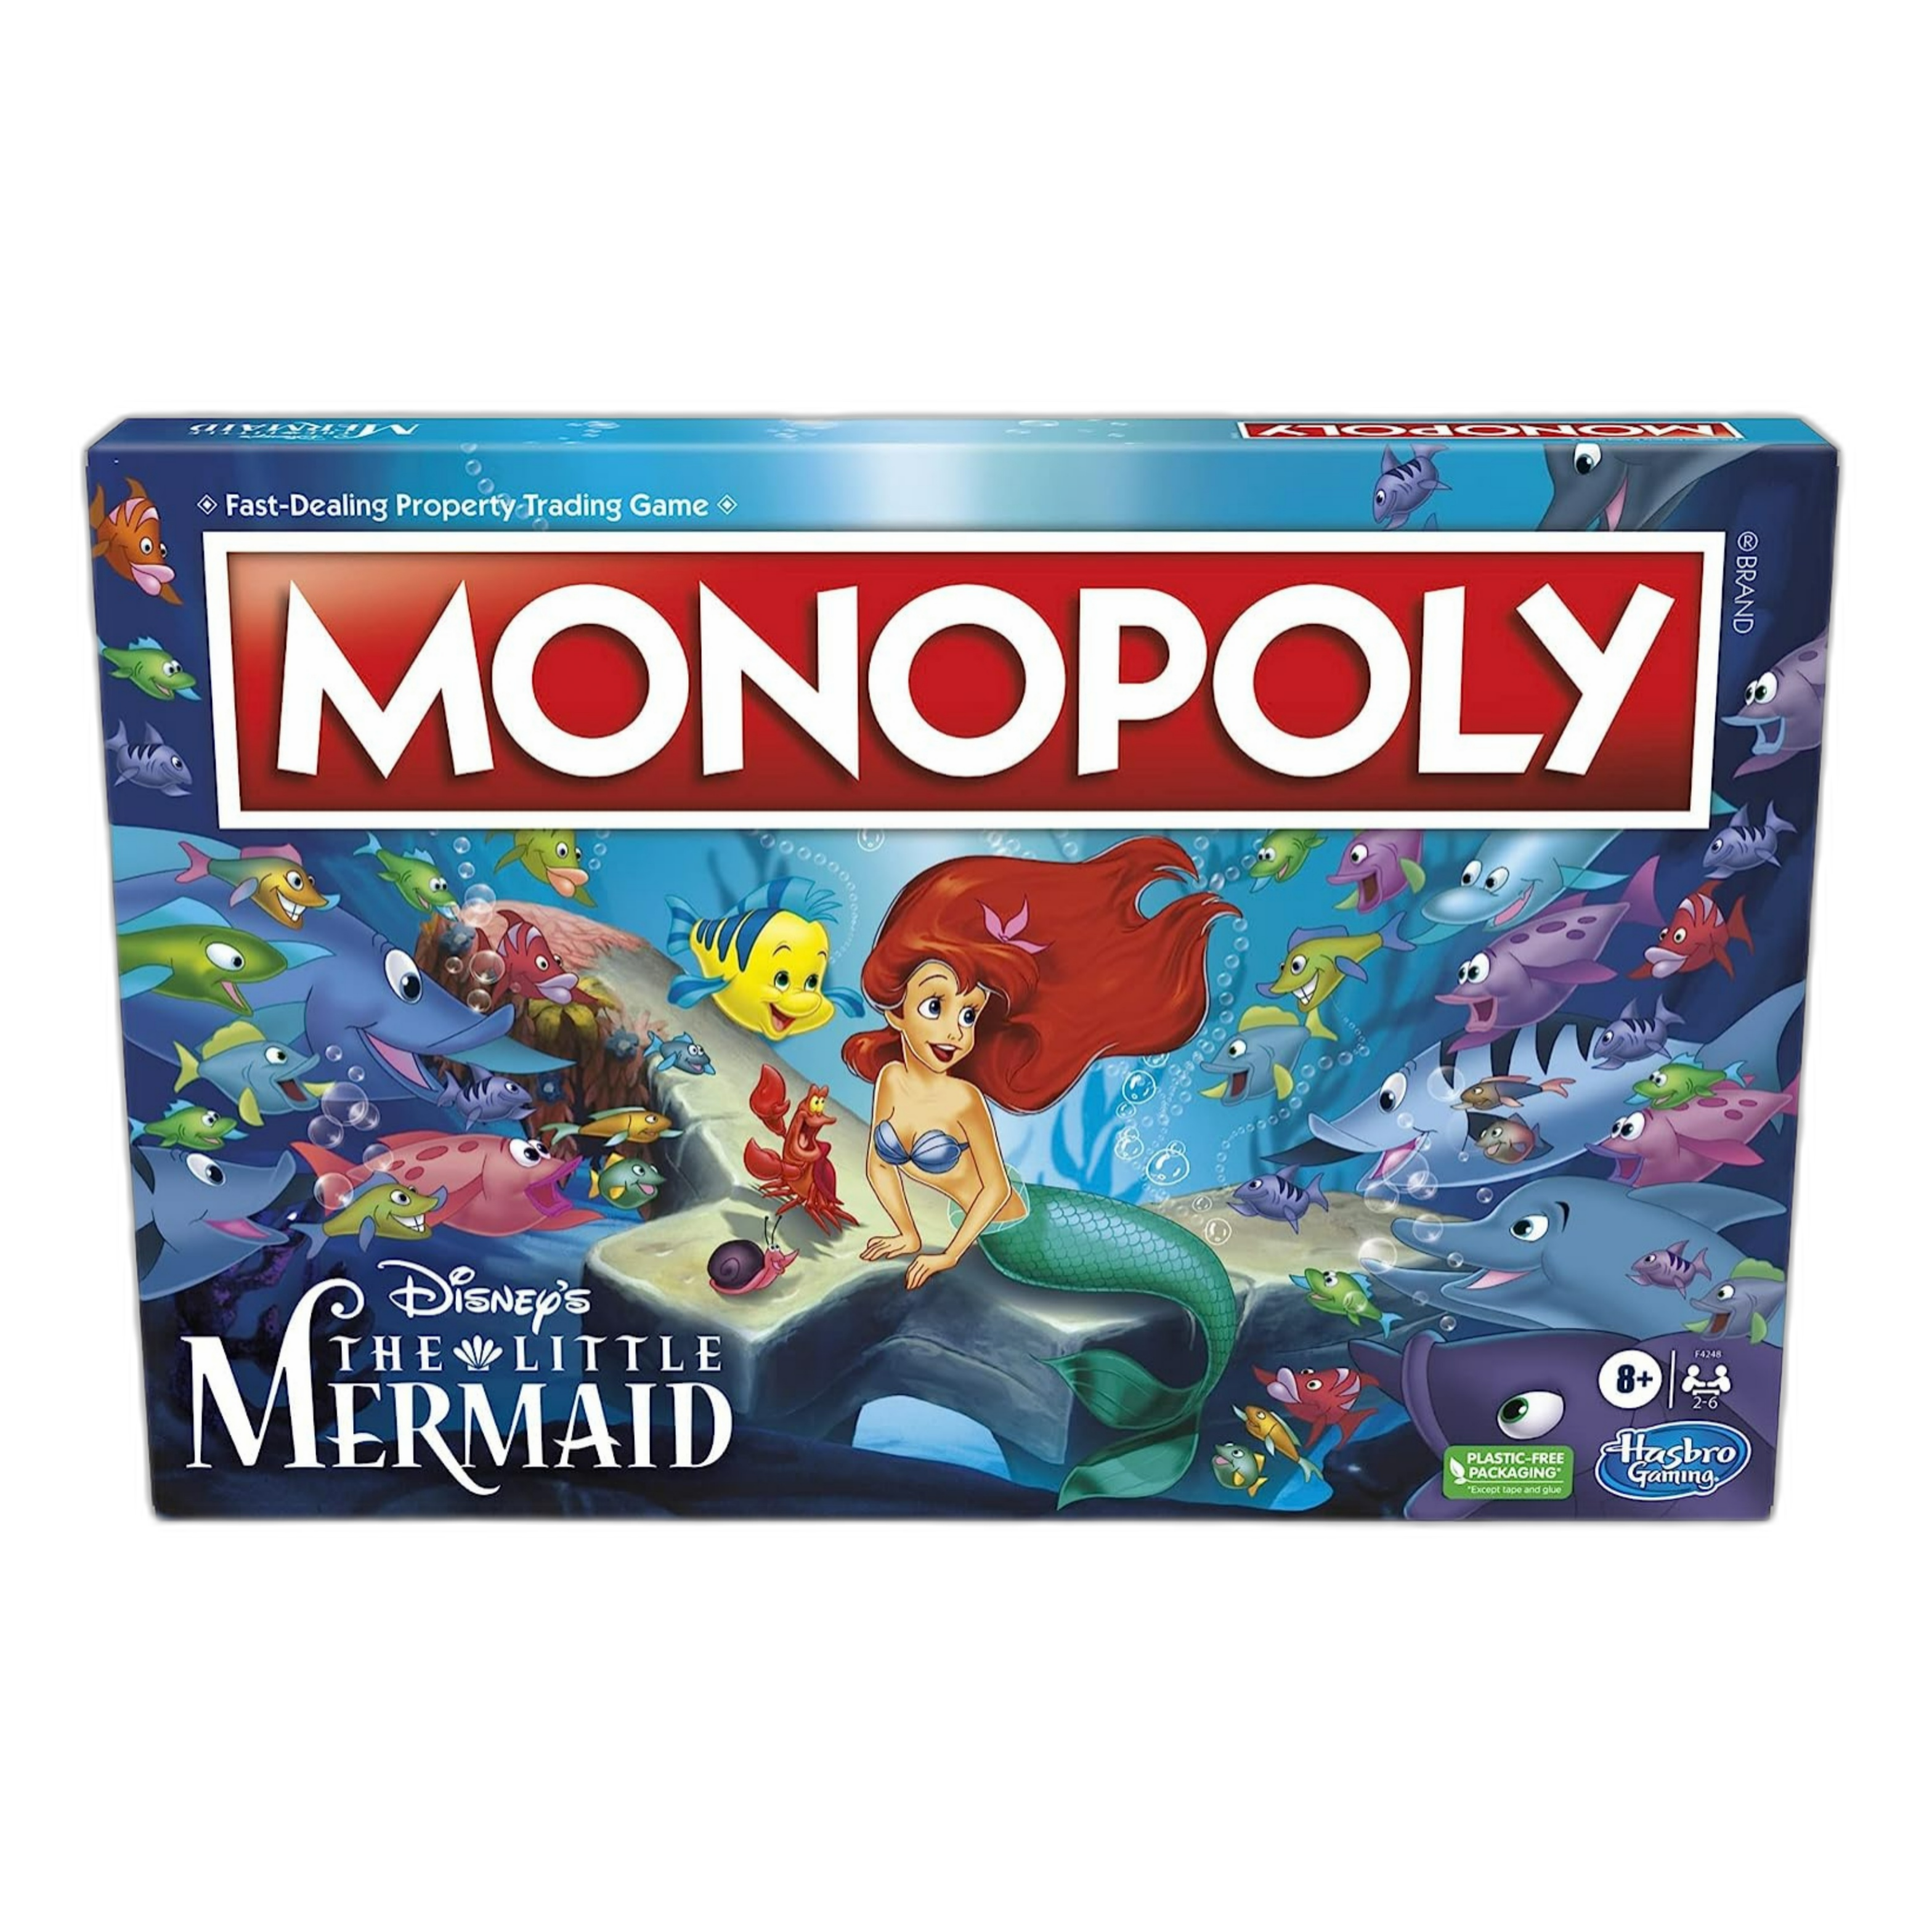 Monopoly: The Little Mermaid board game.